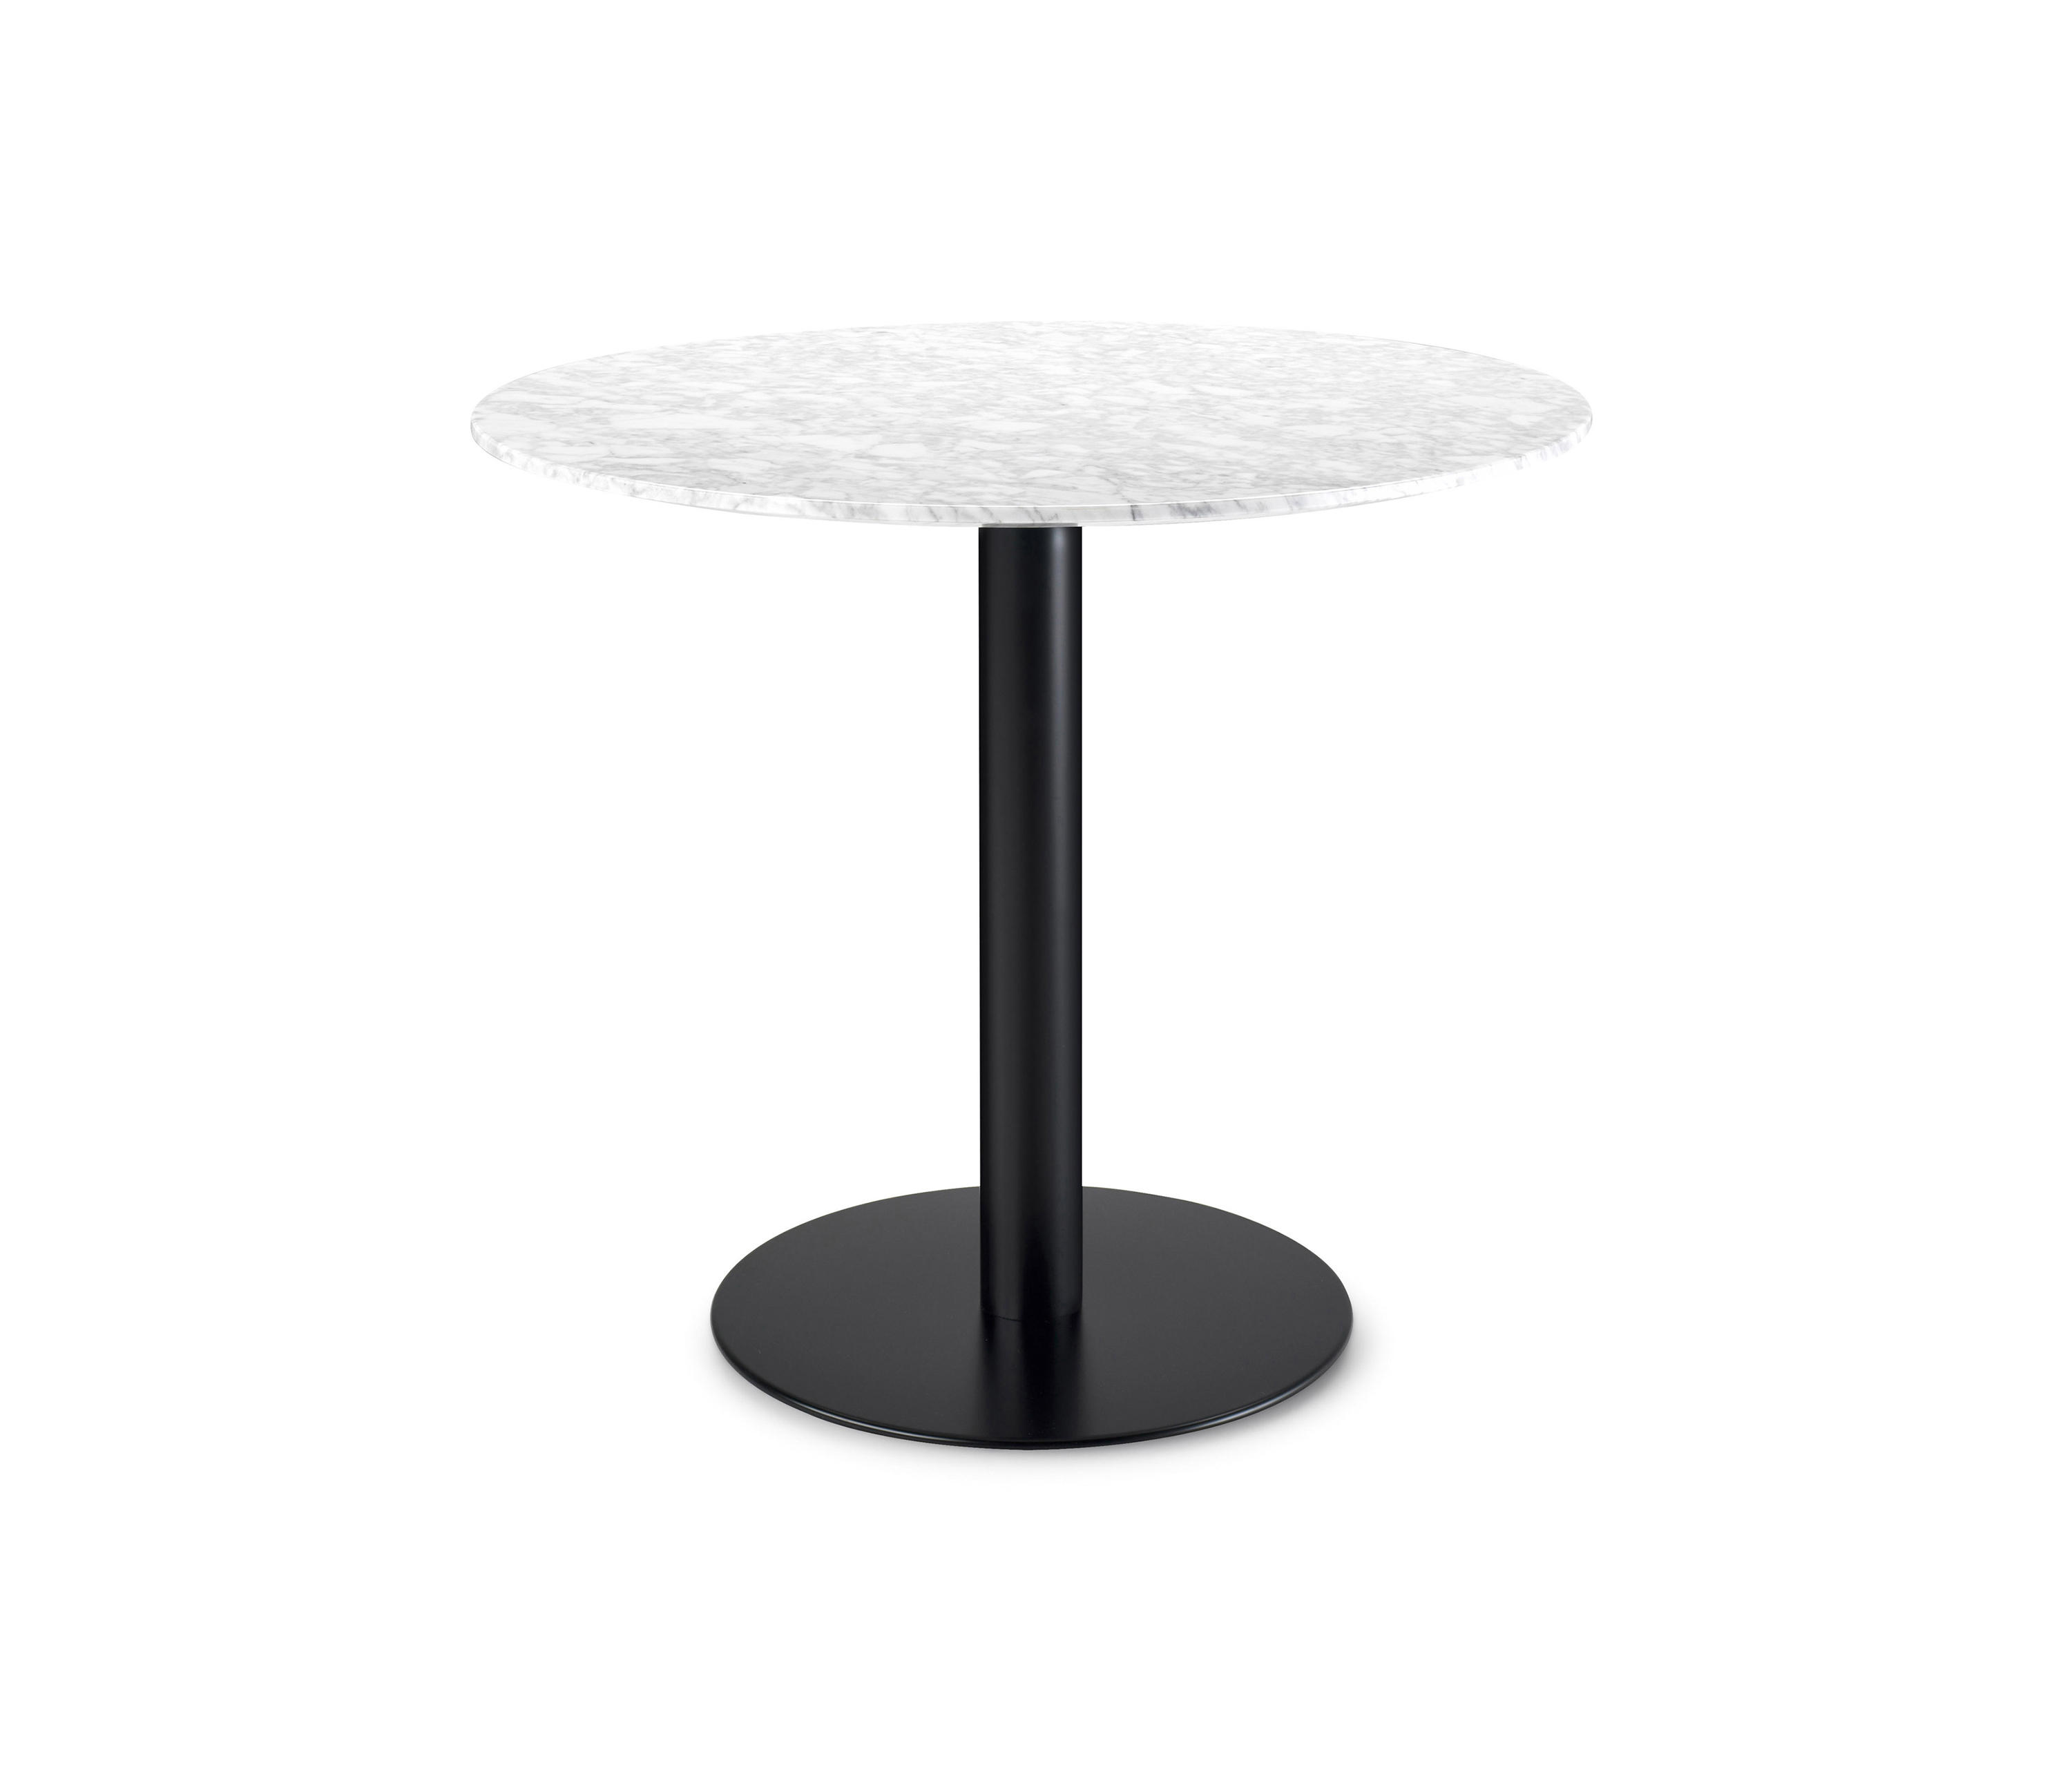 doni side tables from frag architonic lounge table giofra bella green mosaic outdoor accent half circle glass and metal nest thin cabinet oval wood coffee circular patio furniture